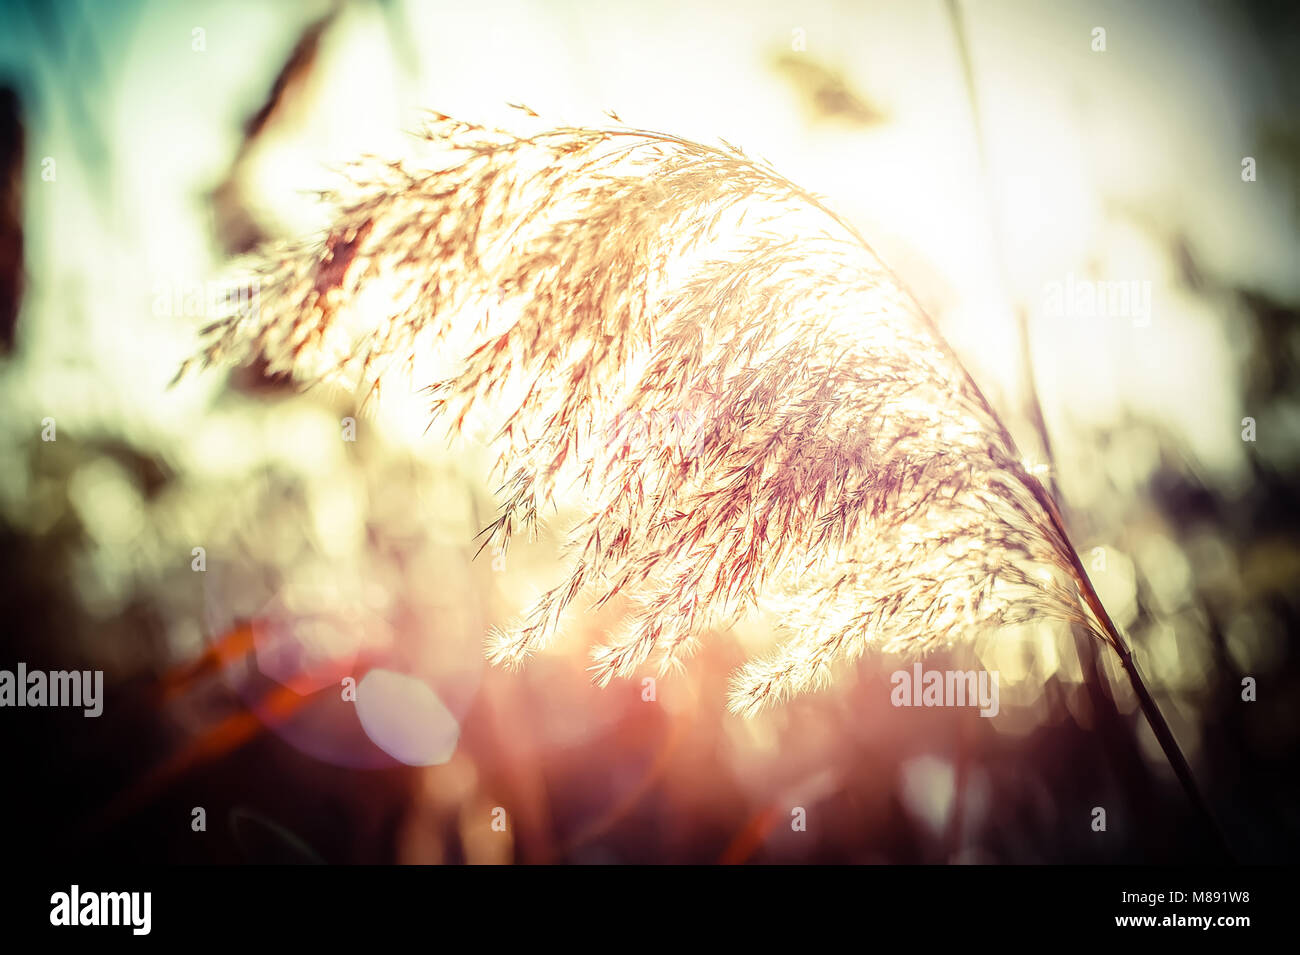 Amazing winter day at sunset. Sun rays shining through dry reed grasses Stock Photo